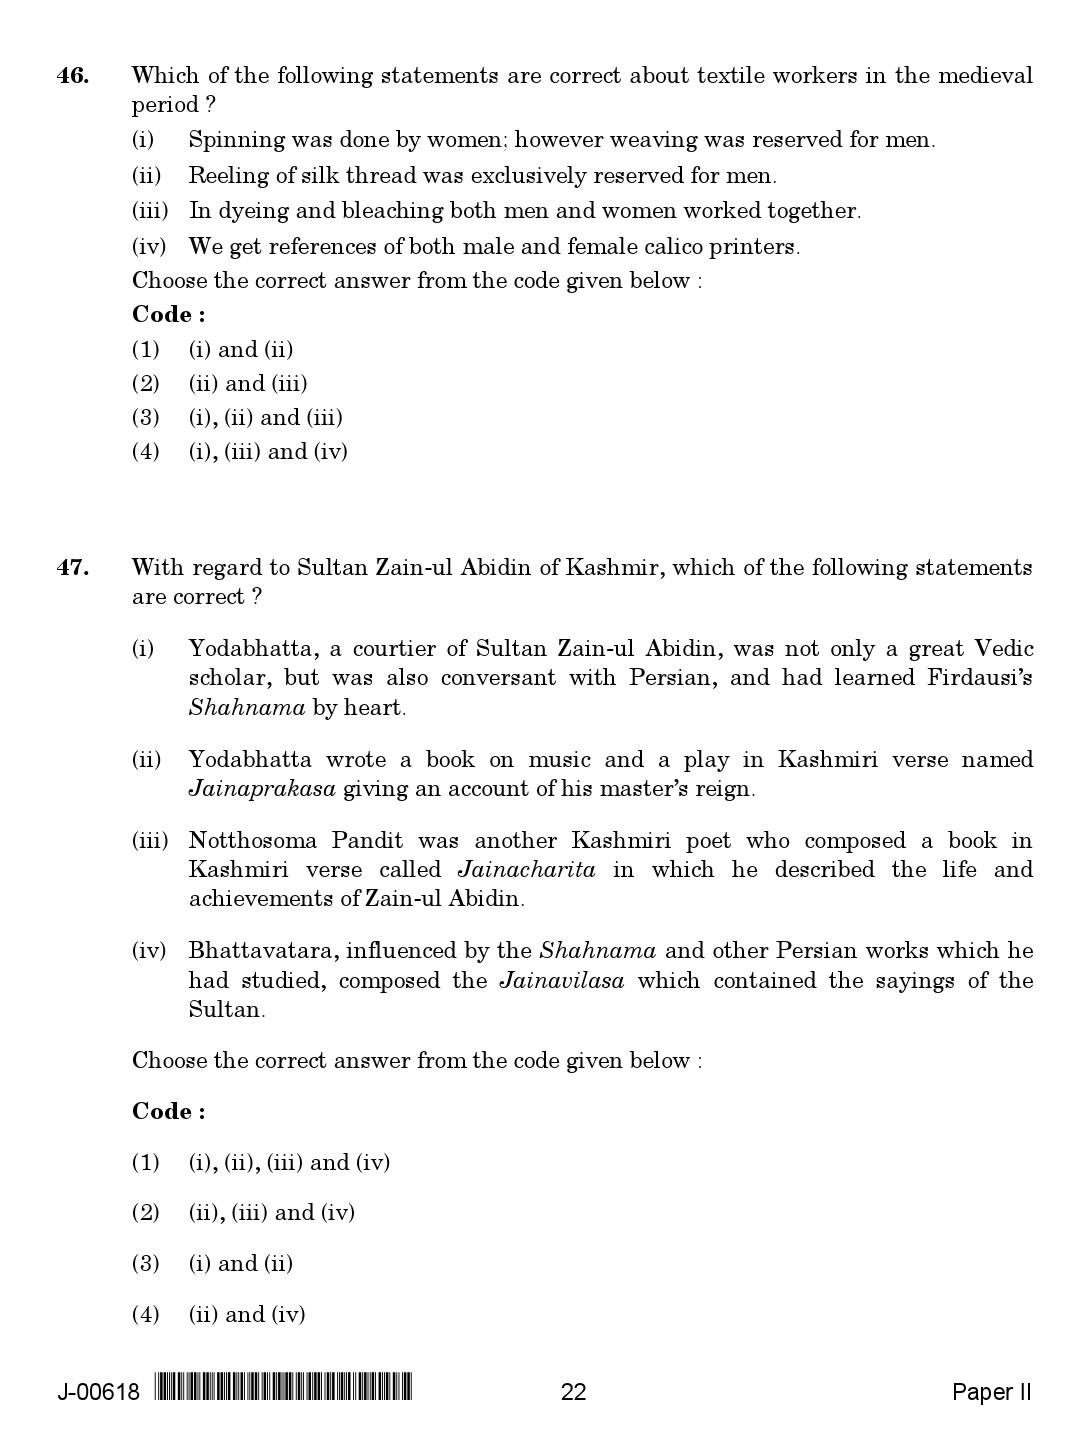 History Question Paper II July 2018 in English 2nd Exam 12